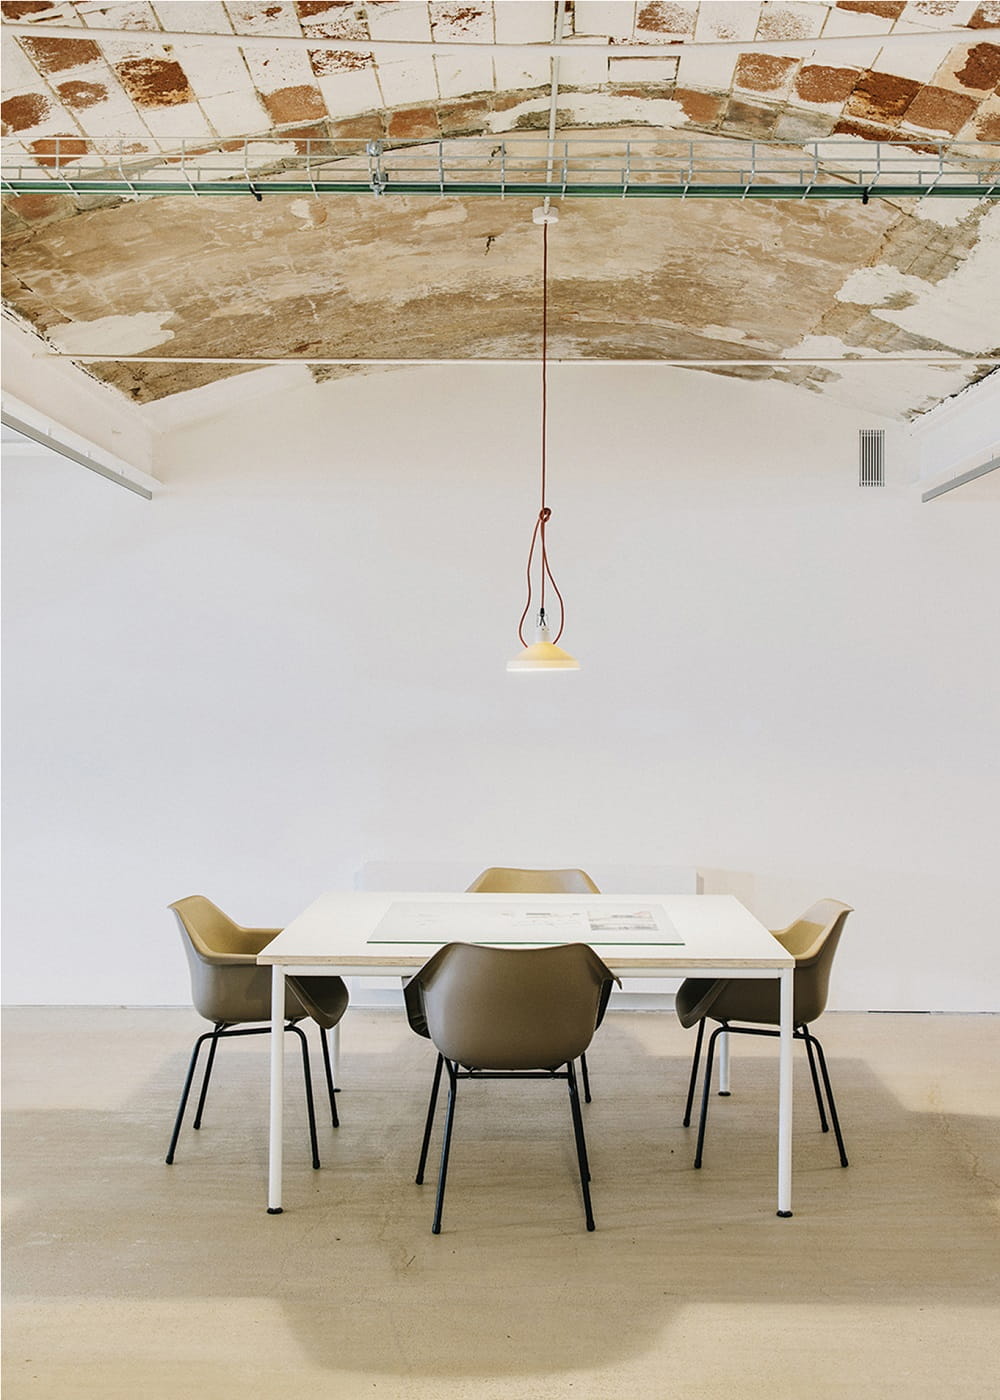 A Curated Workspace in Barcelona Designed by Skye Maunsell & Jordi Veciana